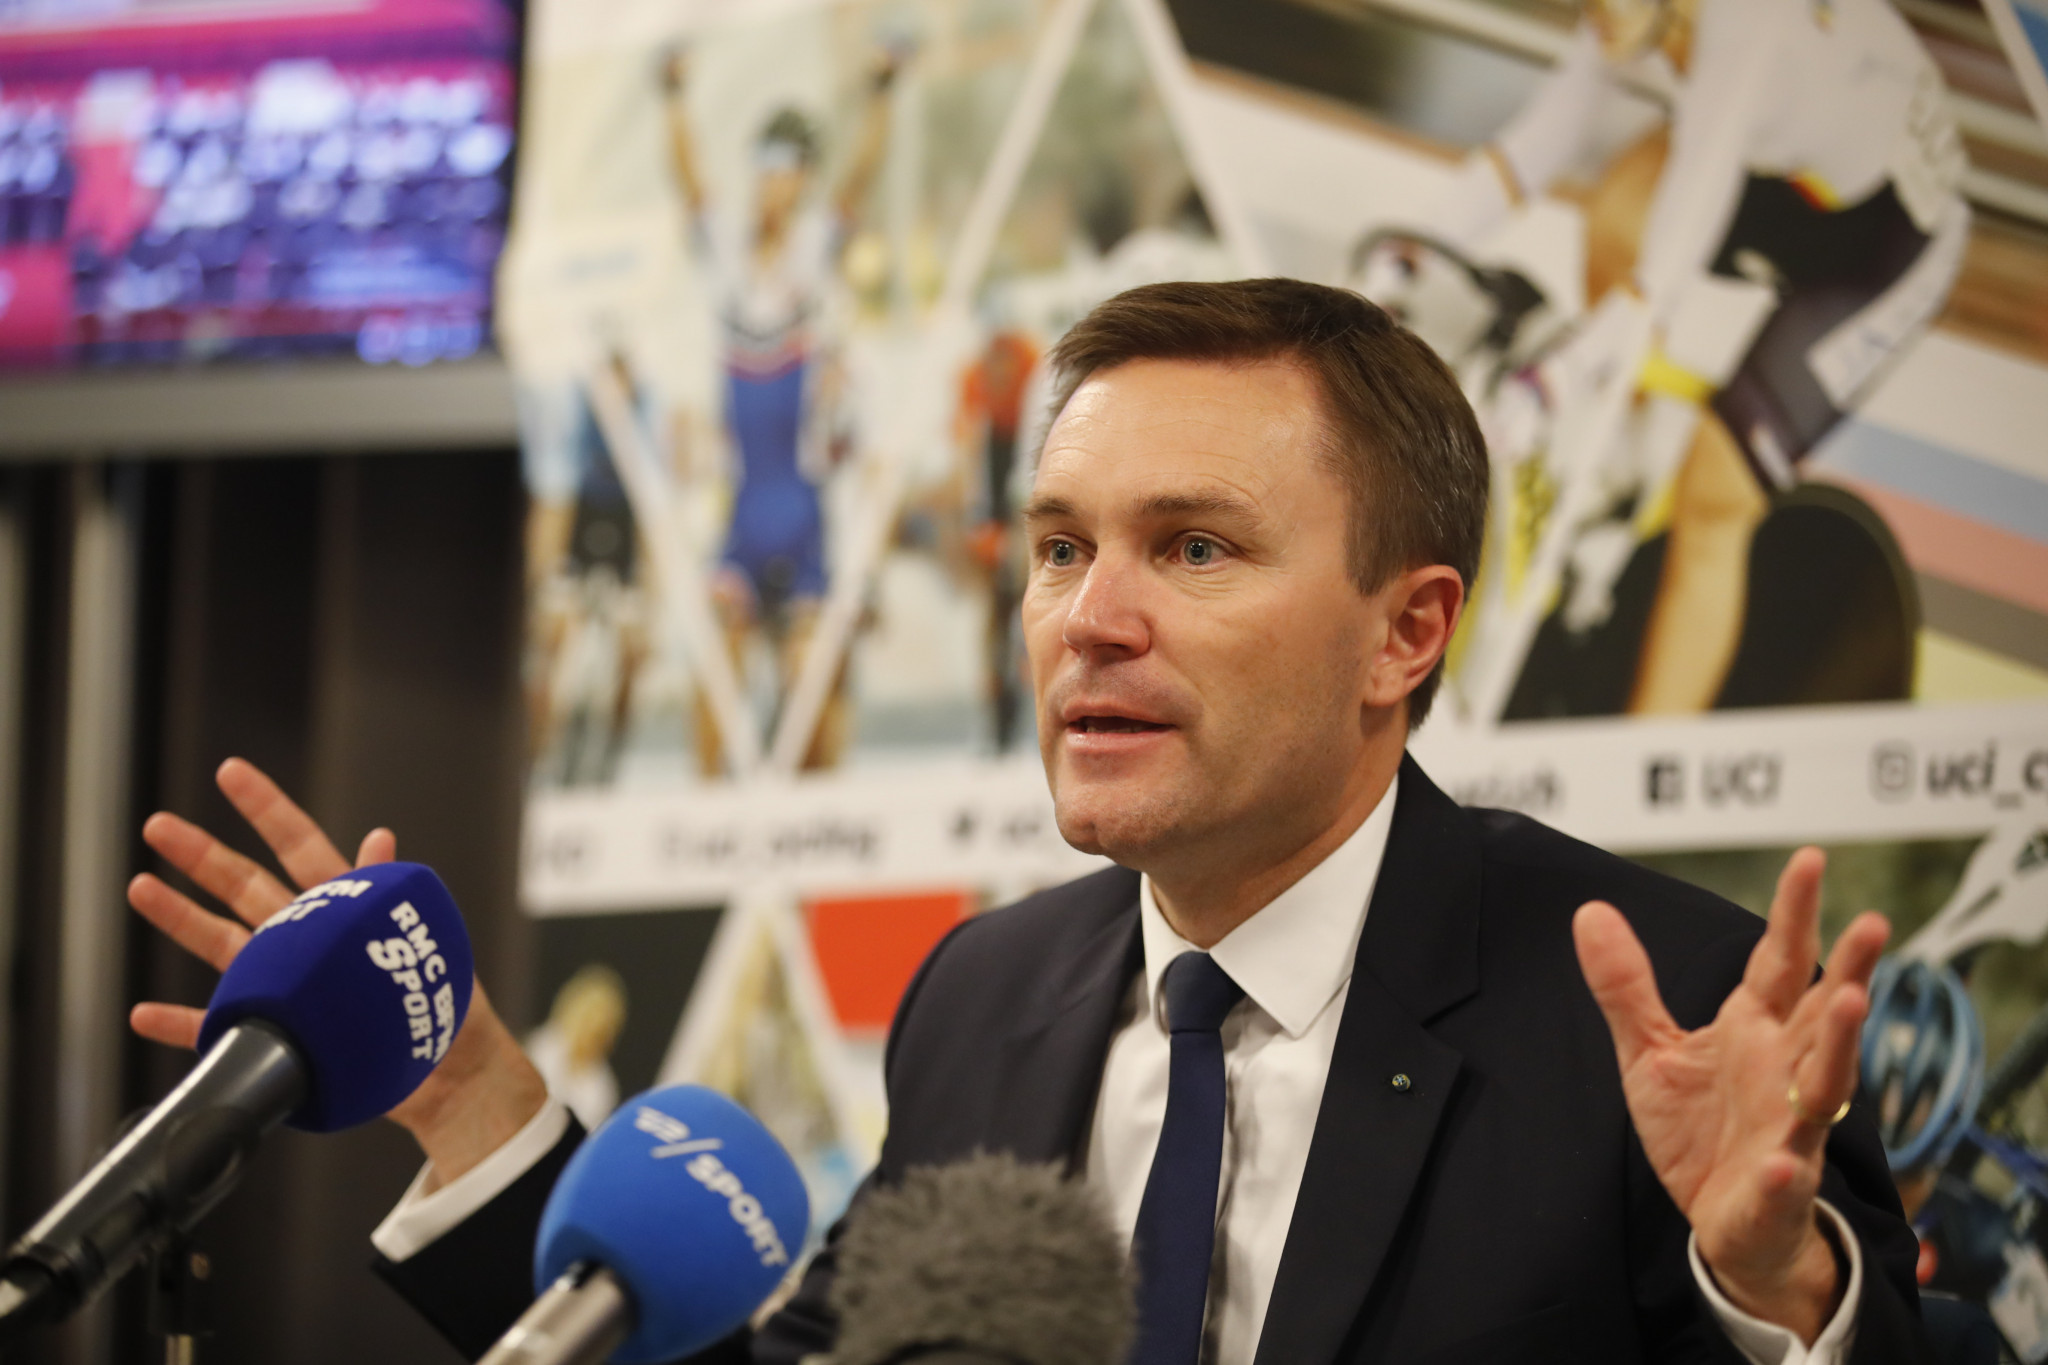 David Lappartient intends to lead CNOSF with a hands-on approach if he is elected as the body prepares for Paris 2024 ©Getty Images